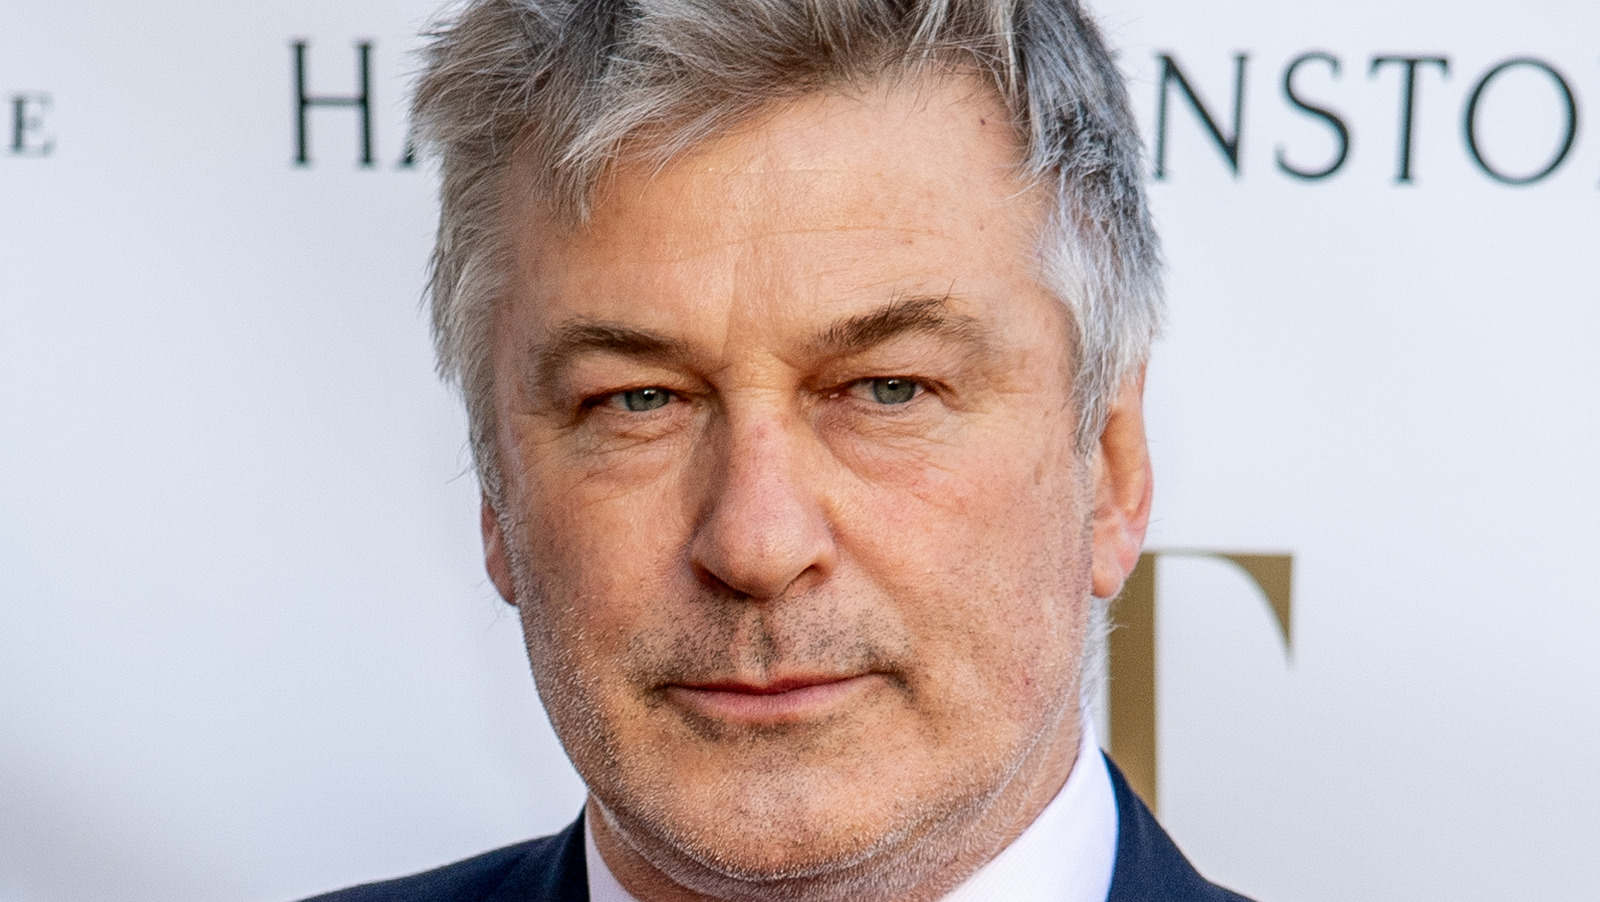 Alec Baldwin Deleted This Eerie Photo From Instagram After The Fatal